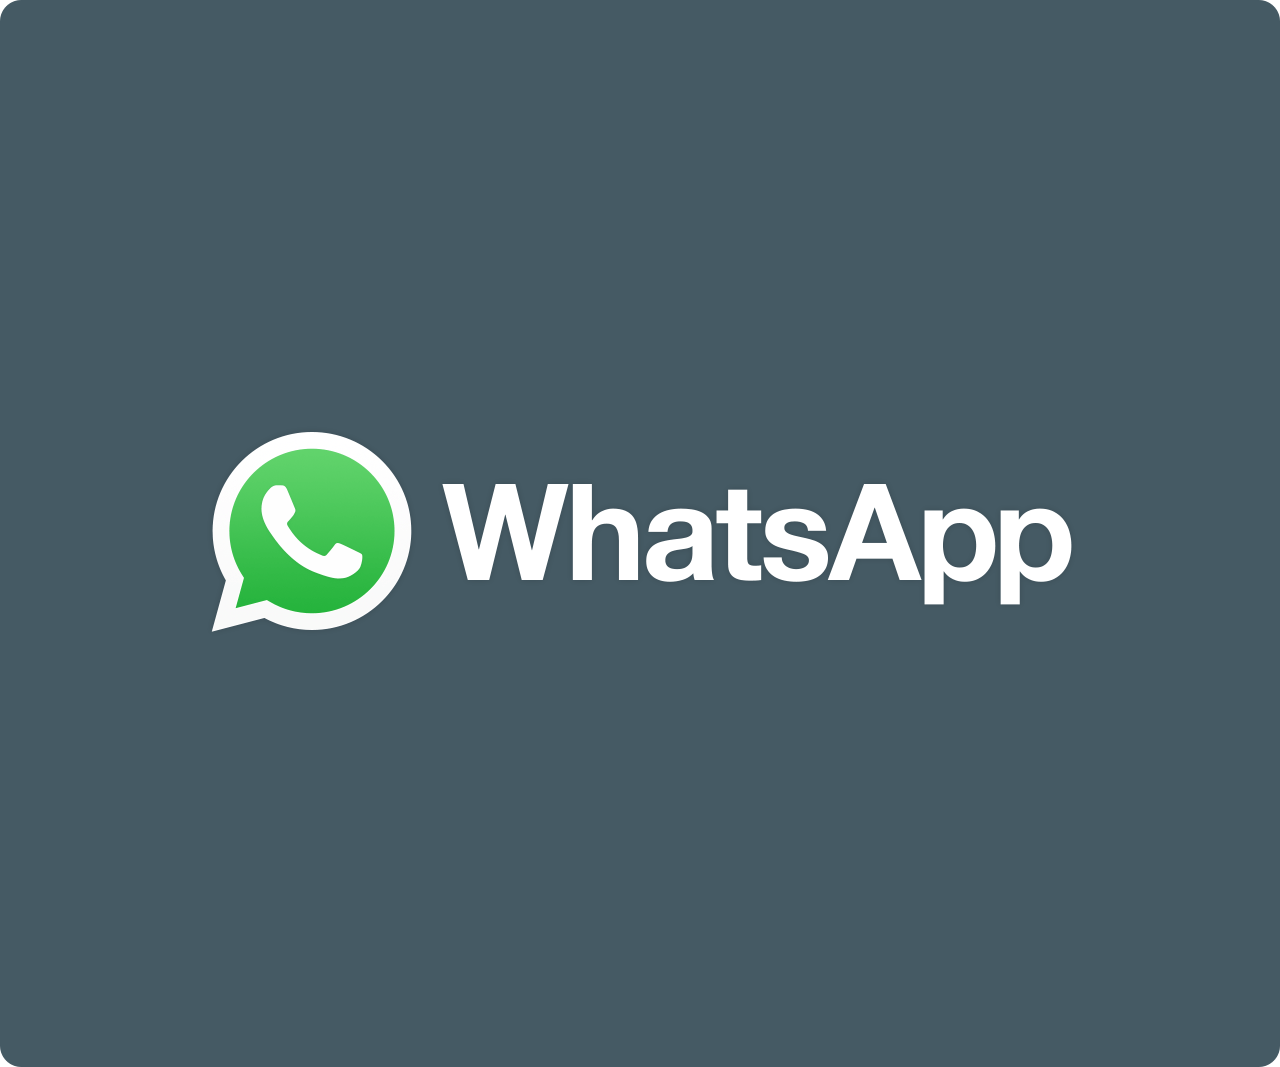 Teal Colored Logo - WhatsApp Brand Resources